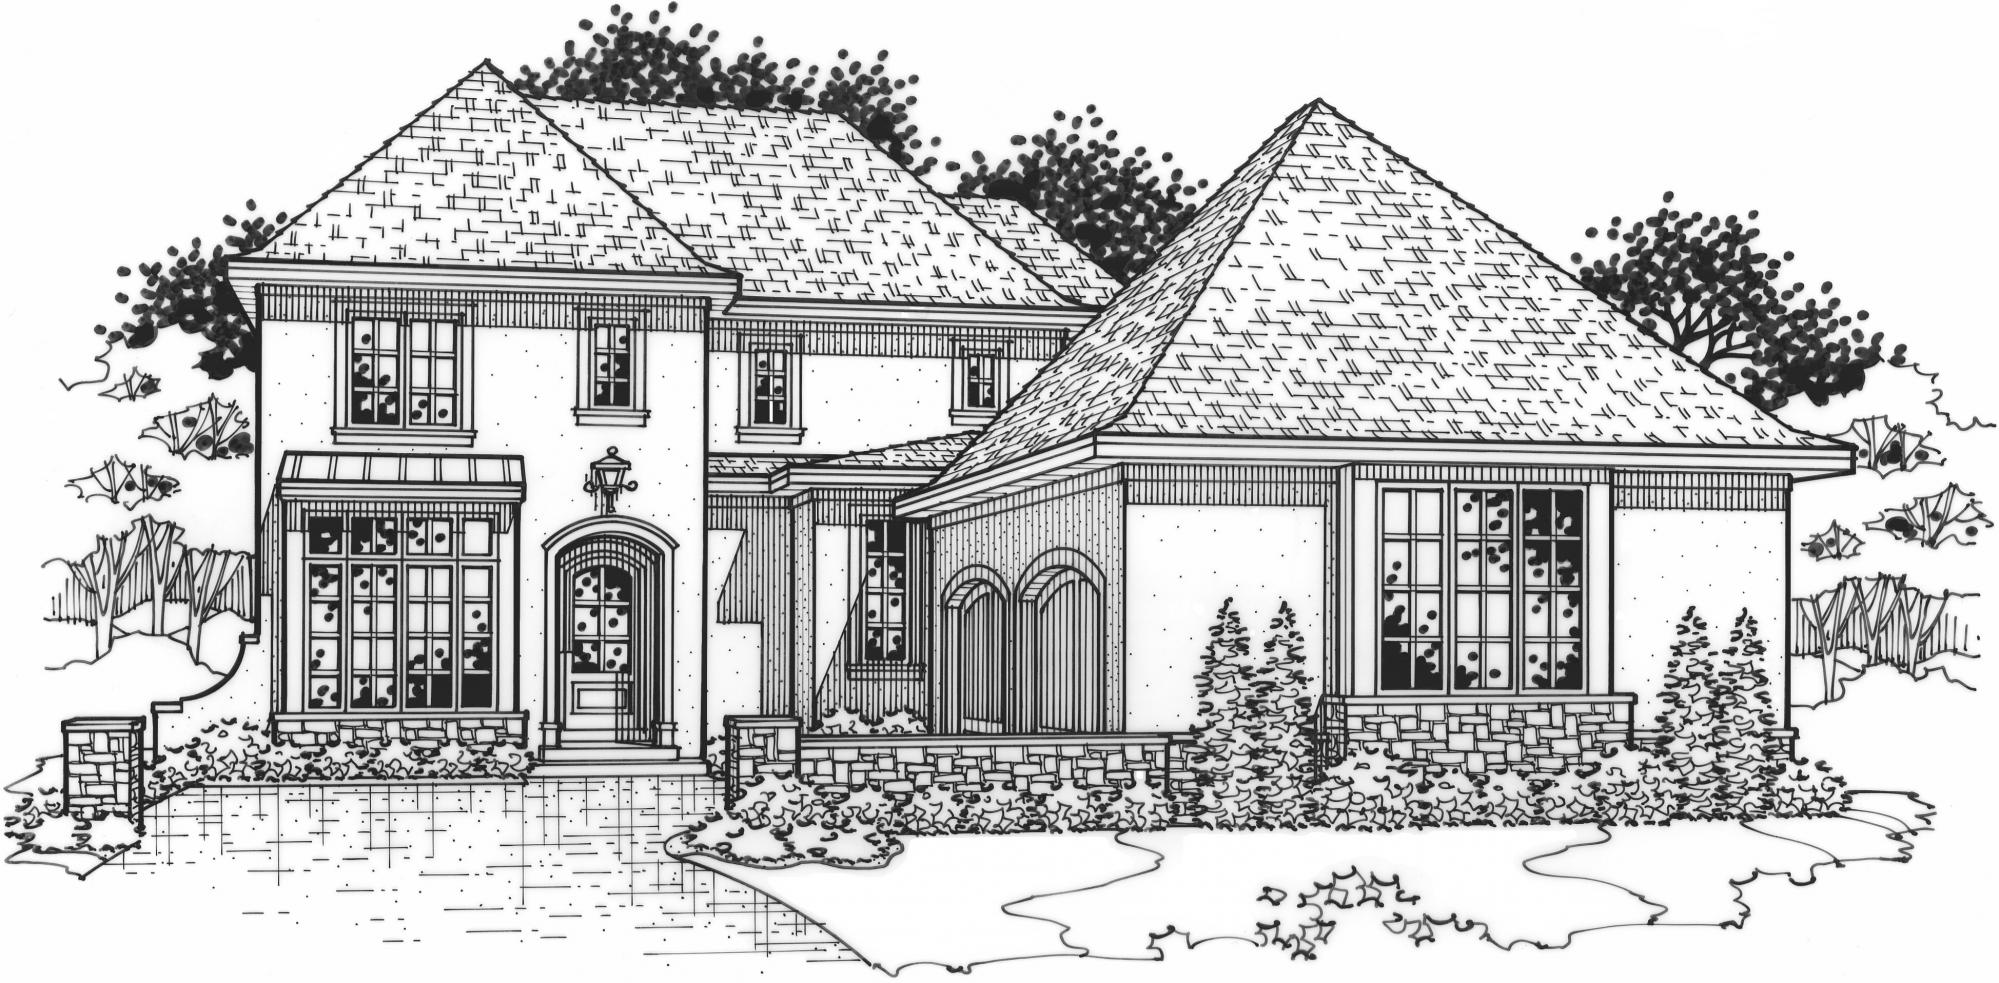 black and white rendering of a winston model from Lambie custom homes